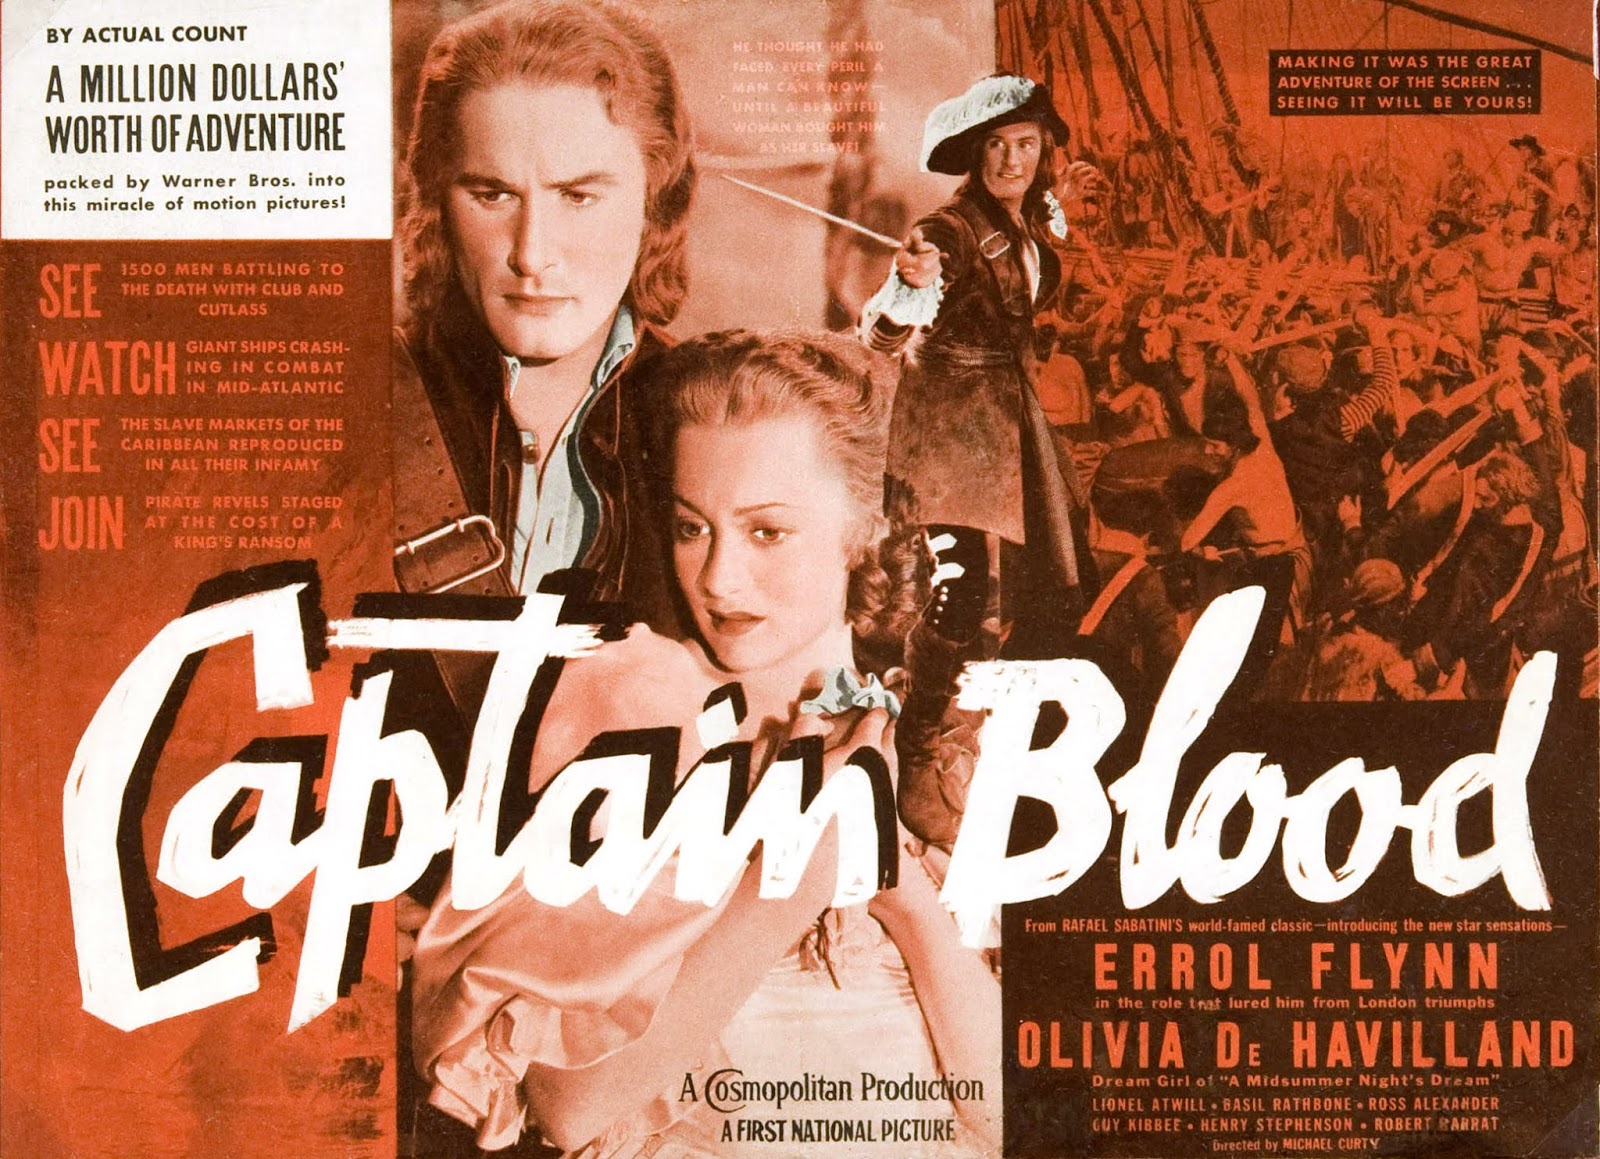 Bloody Pit of Rod: CAPTAIN BLOOD (1935)